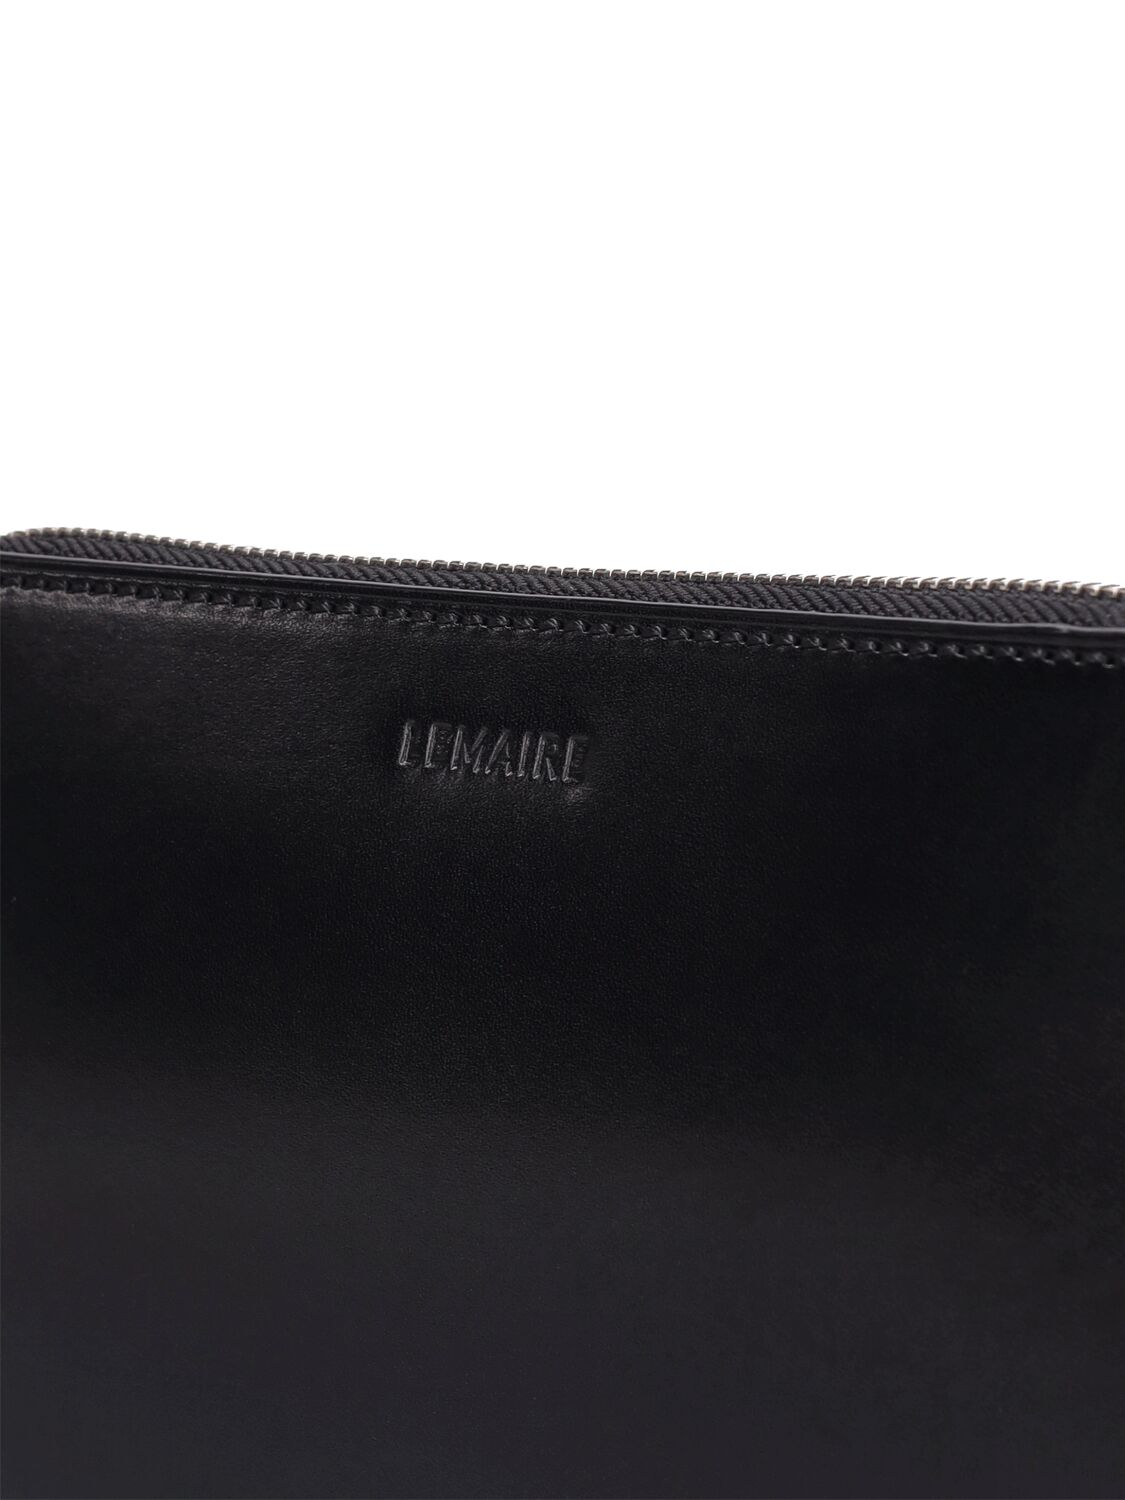 CONTINENTAL LEATHER WALLET ON STRAP